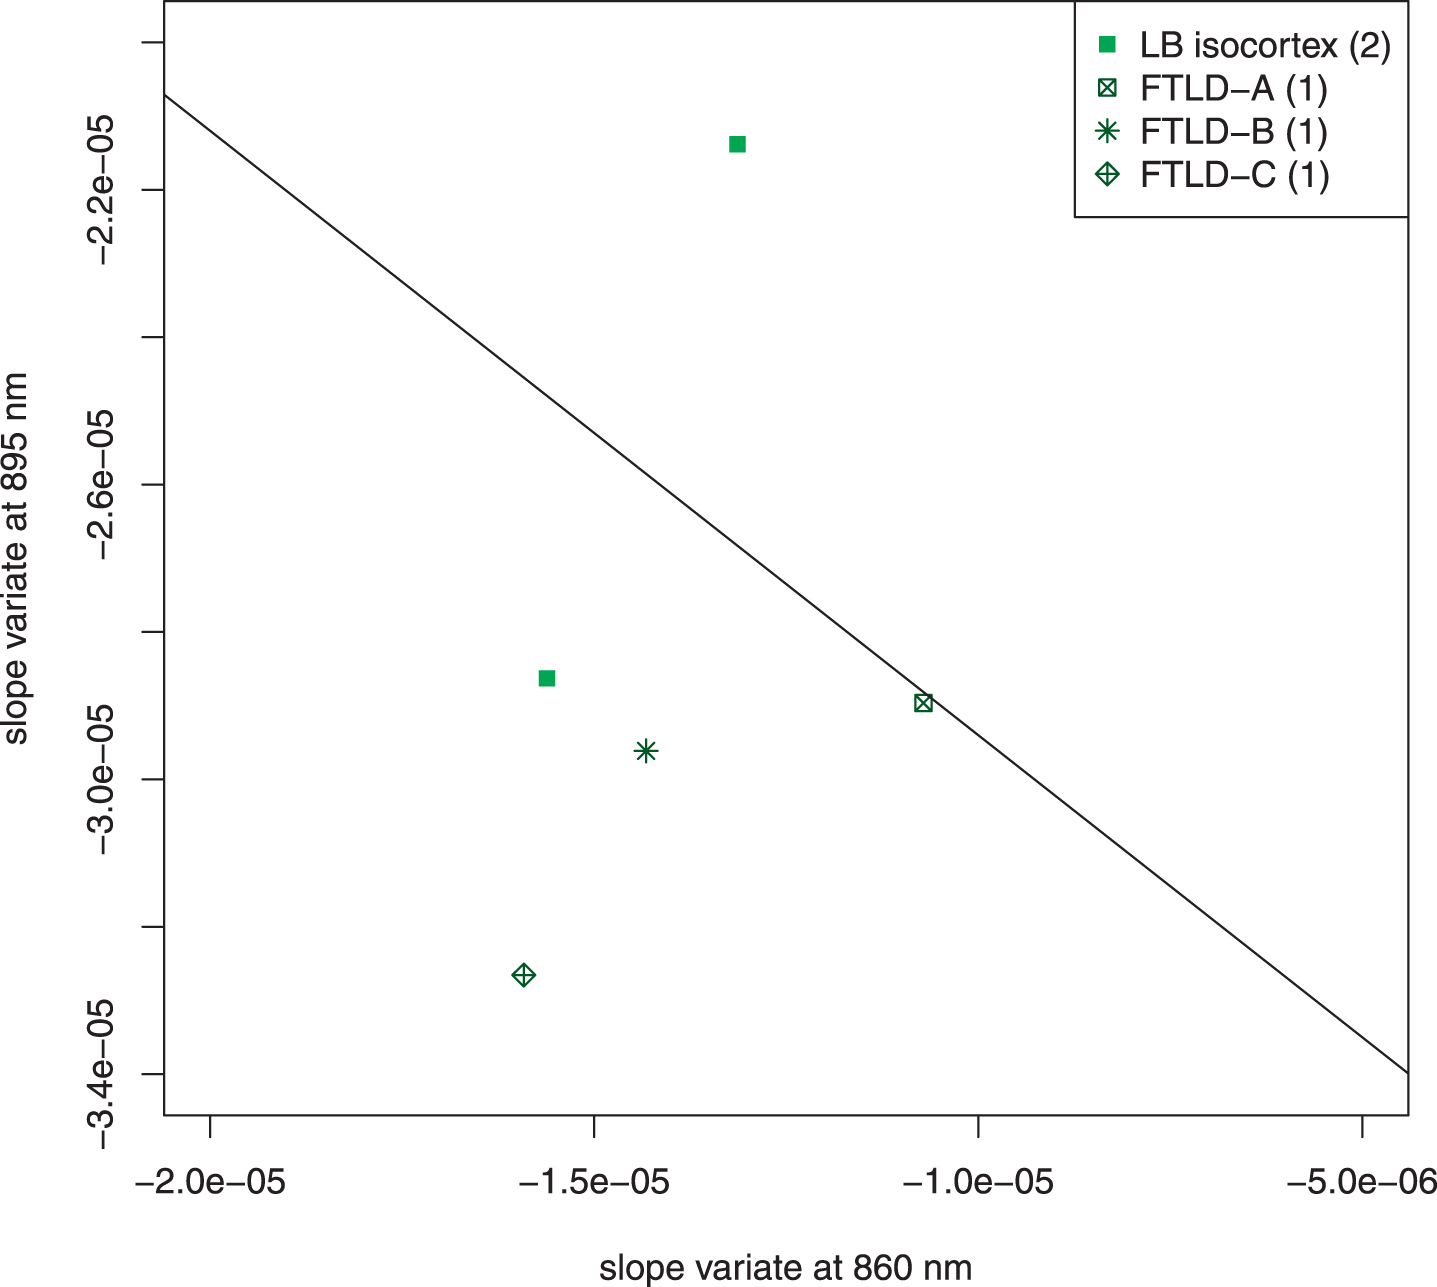 Scatter plot of excluded subjects. Five subjects who came to autopsy were excluded because of unique features of their pathology. Two had Lewy bodies in the temporal isocortex; both of these were NIA-Reagan high likelihood, Braak VI. Three had frontotemporal lobar degeneration (FTLD) with other pathology. FTLD-A, NIA-Reagan intermediate likelihood, Braak IV; FTLD-B, tau-type, NIA Reagan high likelihood, Braak stage VI, Lewy bodies; FTLD-C, TDP 43 positive inclusions (including temporal cortex), Lewy bodies, 1 + neuritic plaques. The line drawn separates the AD subjects from the control subjects in Fig. 4. The exclusion of these subjects did not affect the overall interpretation of the data. It is noteworthy that the two most extreme cases (LB isocortex on control side of line and FTLD-C) both had pathologic structures in temporal cortex, which adds a confounding factor to the optical signal.